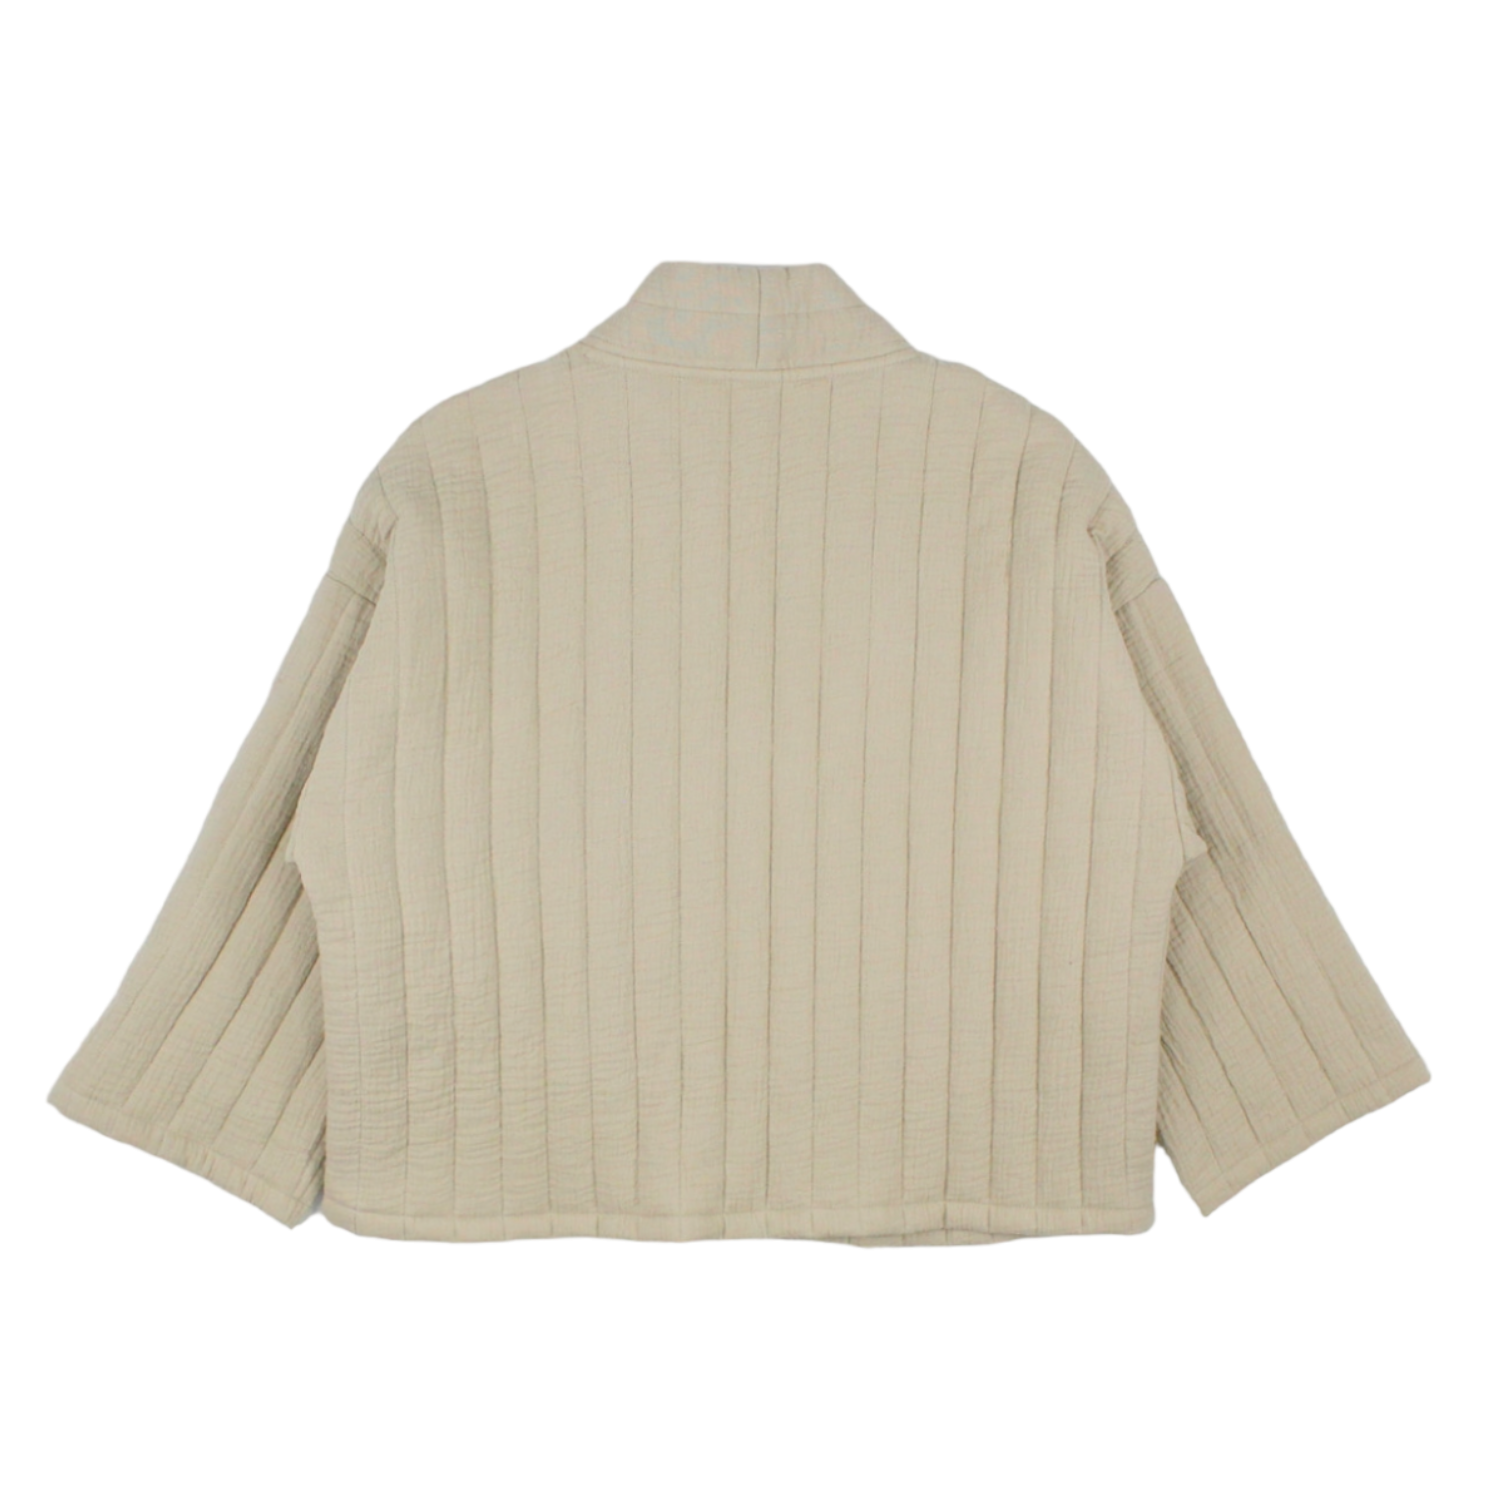 NRBY Beige Quilted Kimono Jacket - Sample